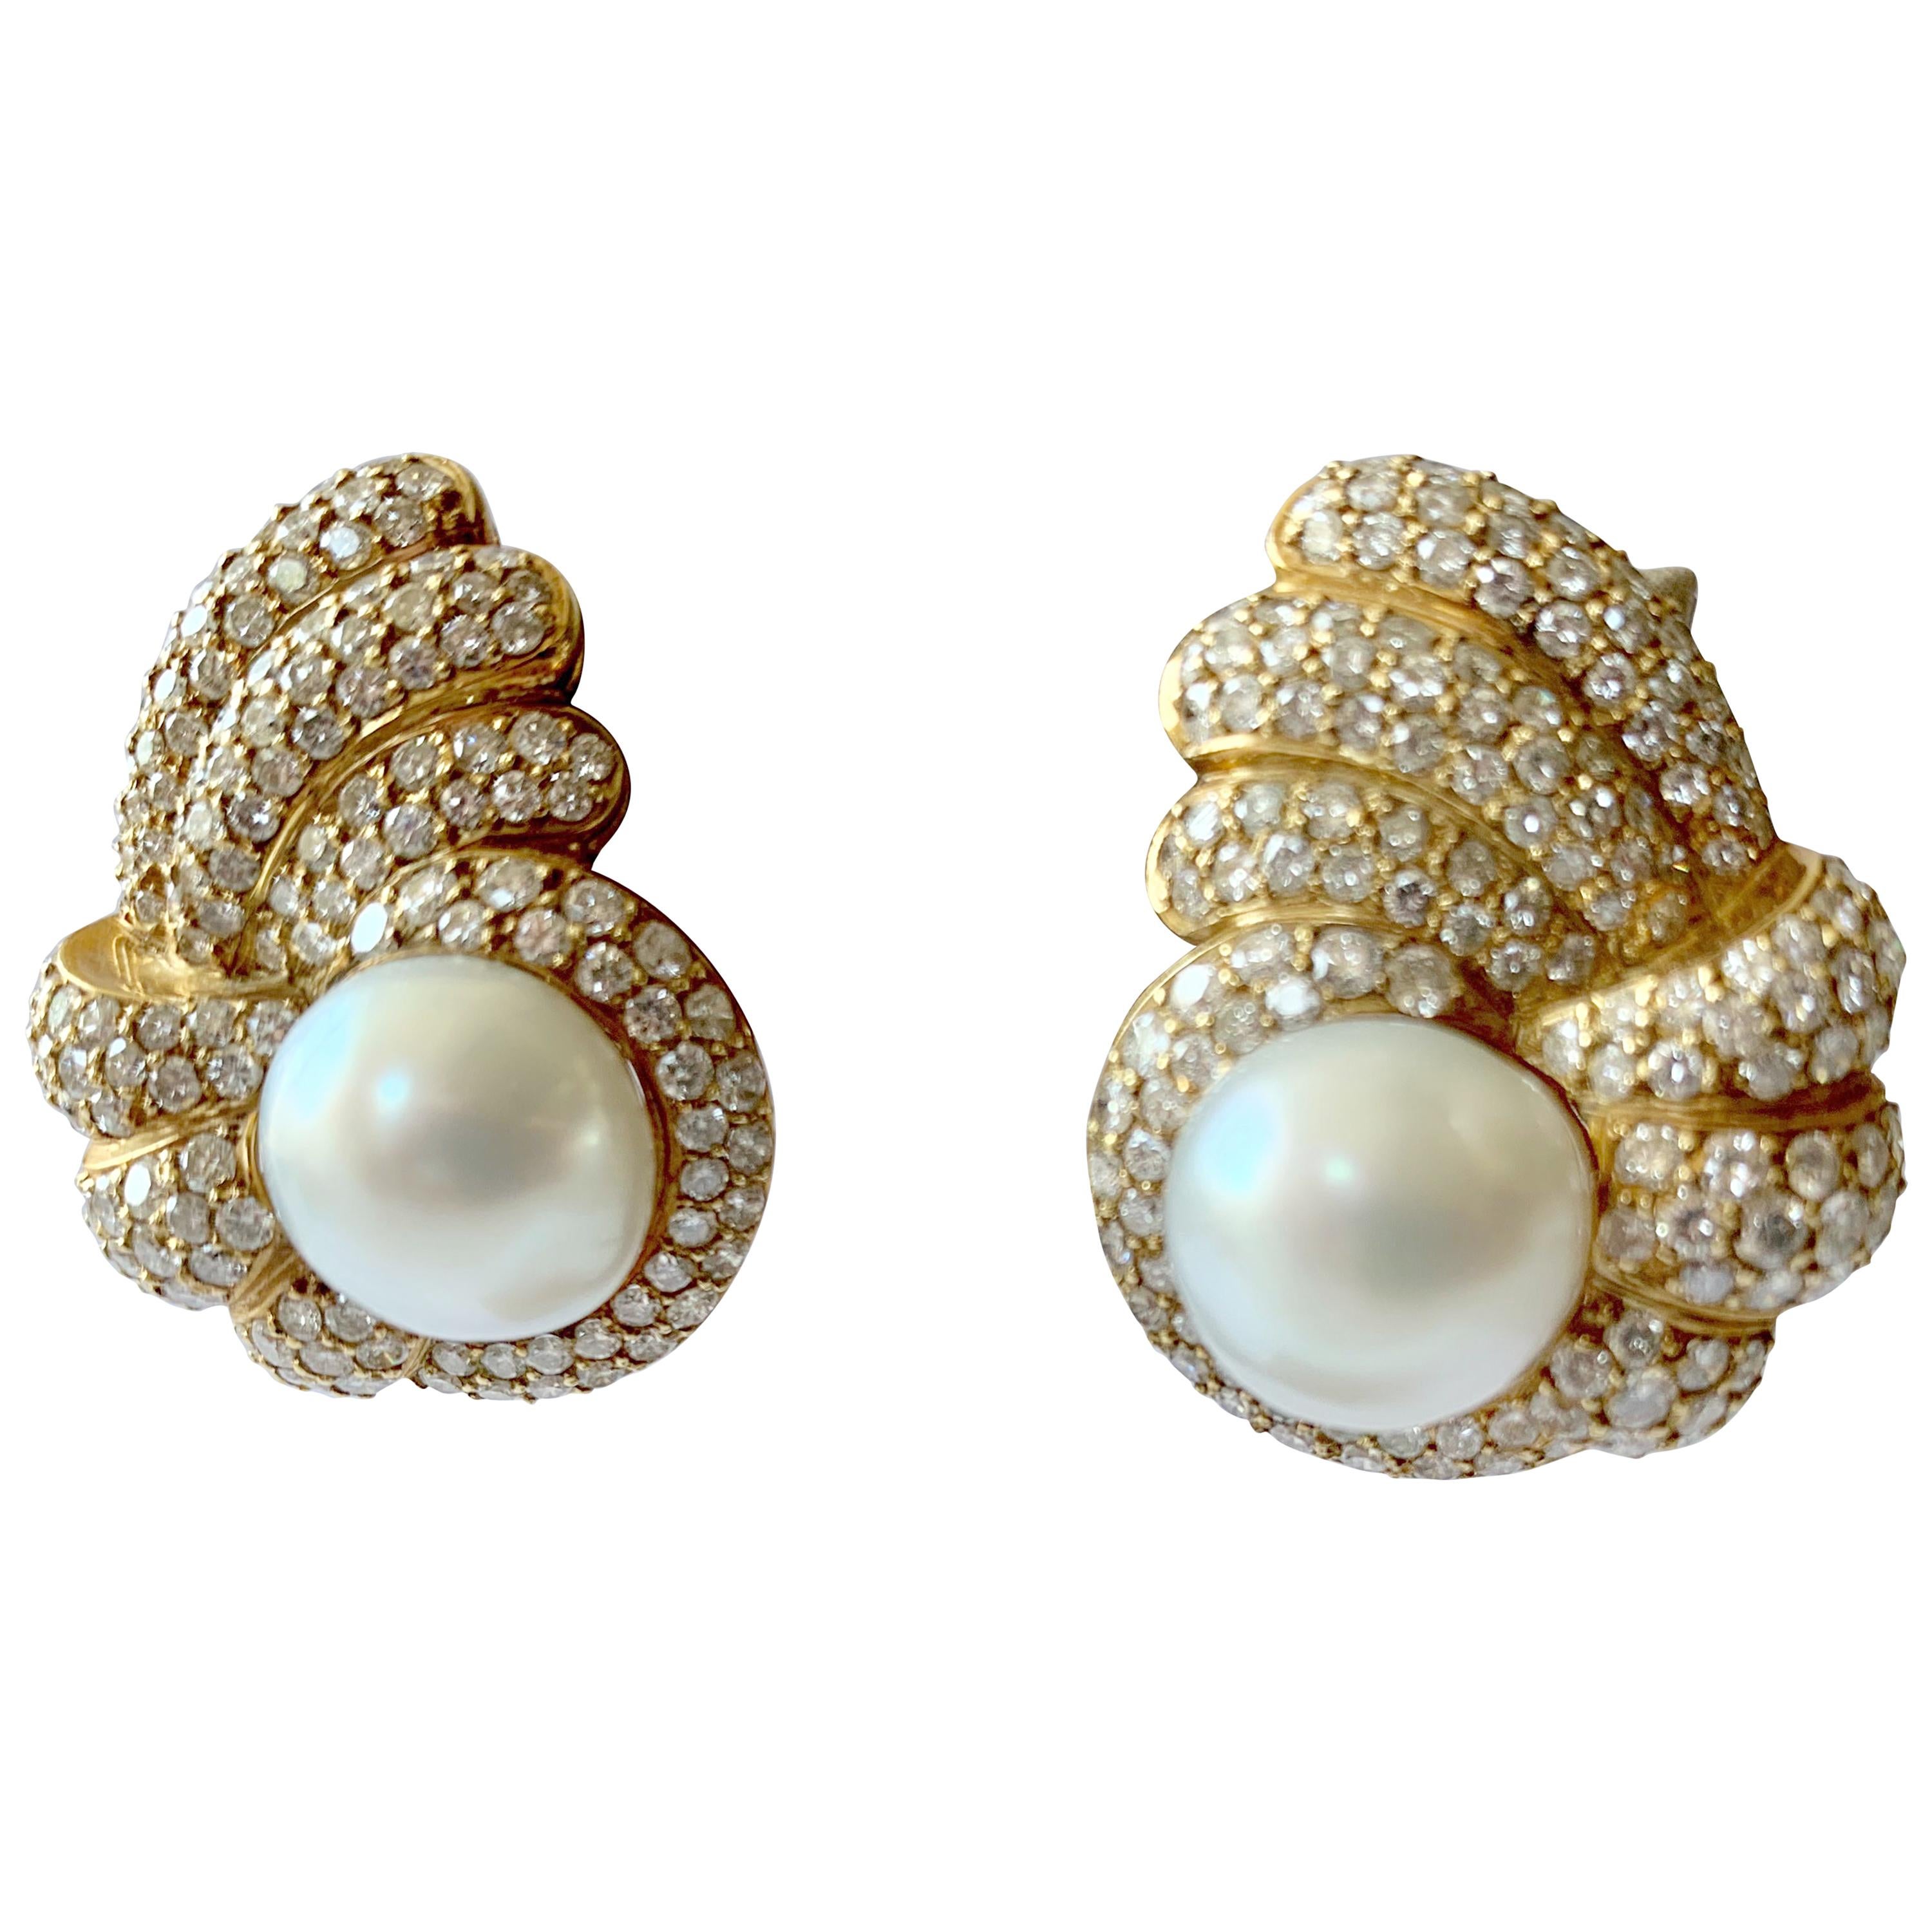 18 Karat Yellow Gold Ladies Clip-On Earrings with South Sea Pearls and Diamonds